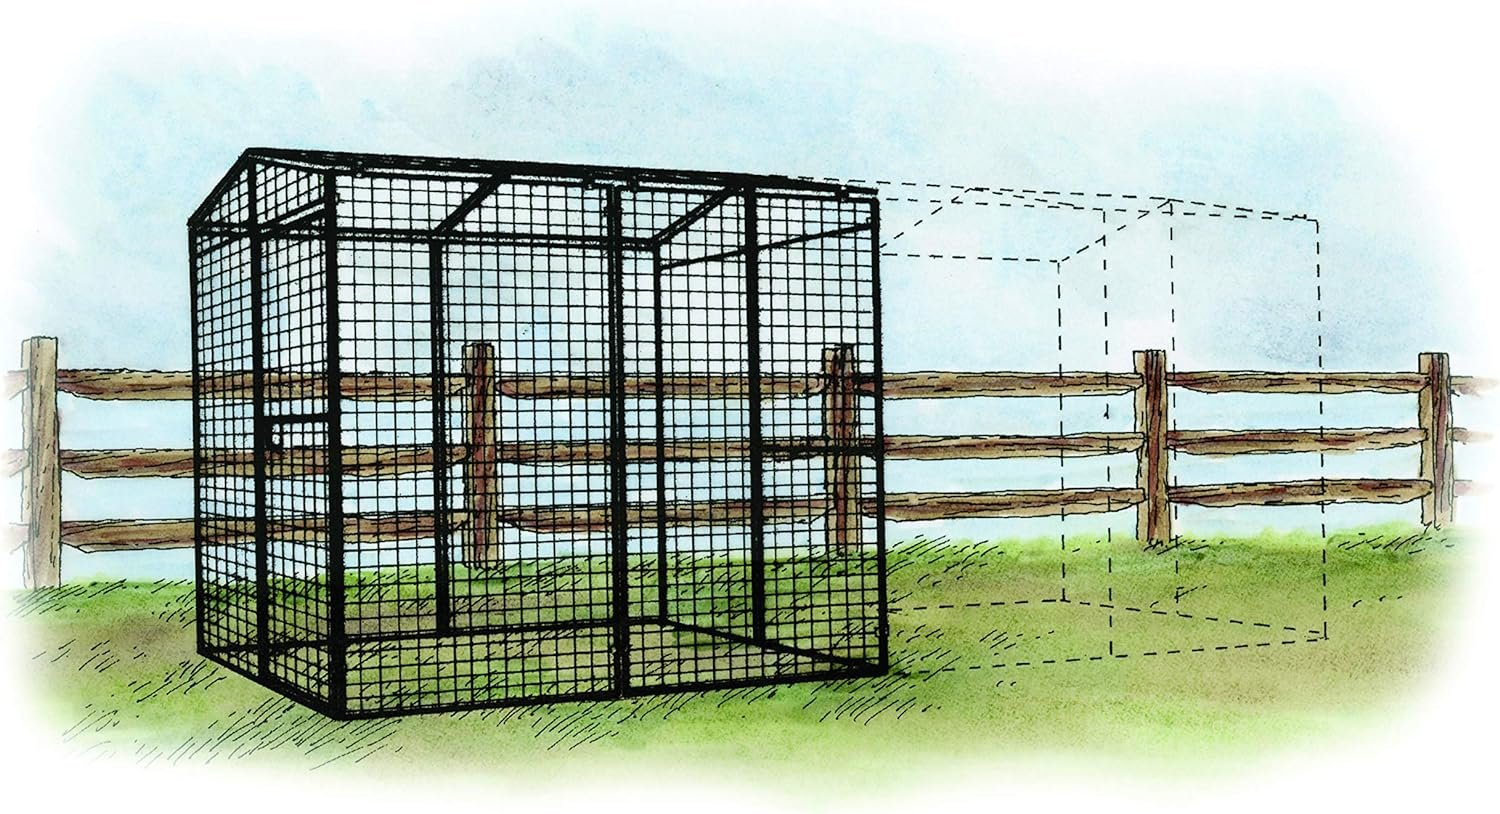 OverEZ Chicken Coop Walk-in 8 ft. Chicken Run - 6’6”W x 7’6L x 6’3”H Outdoor Chicken Pen for Chickens, Hens, and Poultry (Chicken Coop Not Included), Black